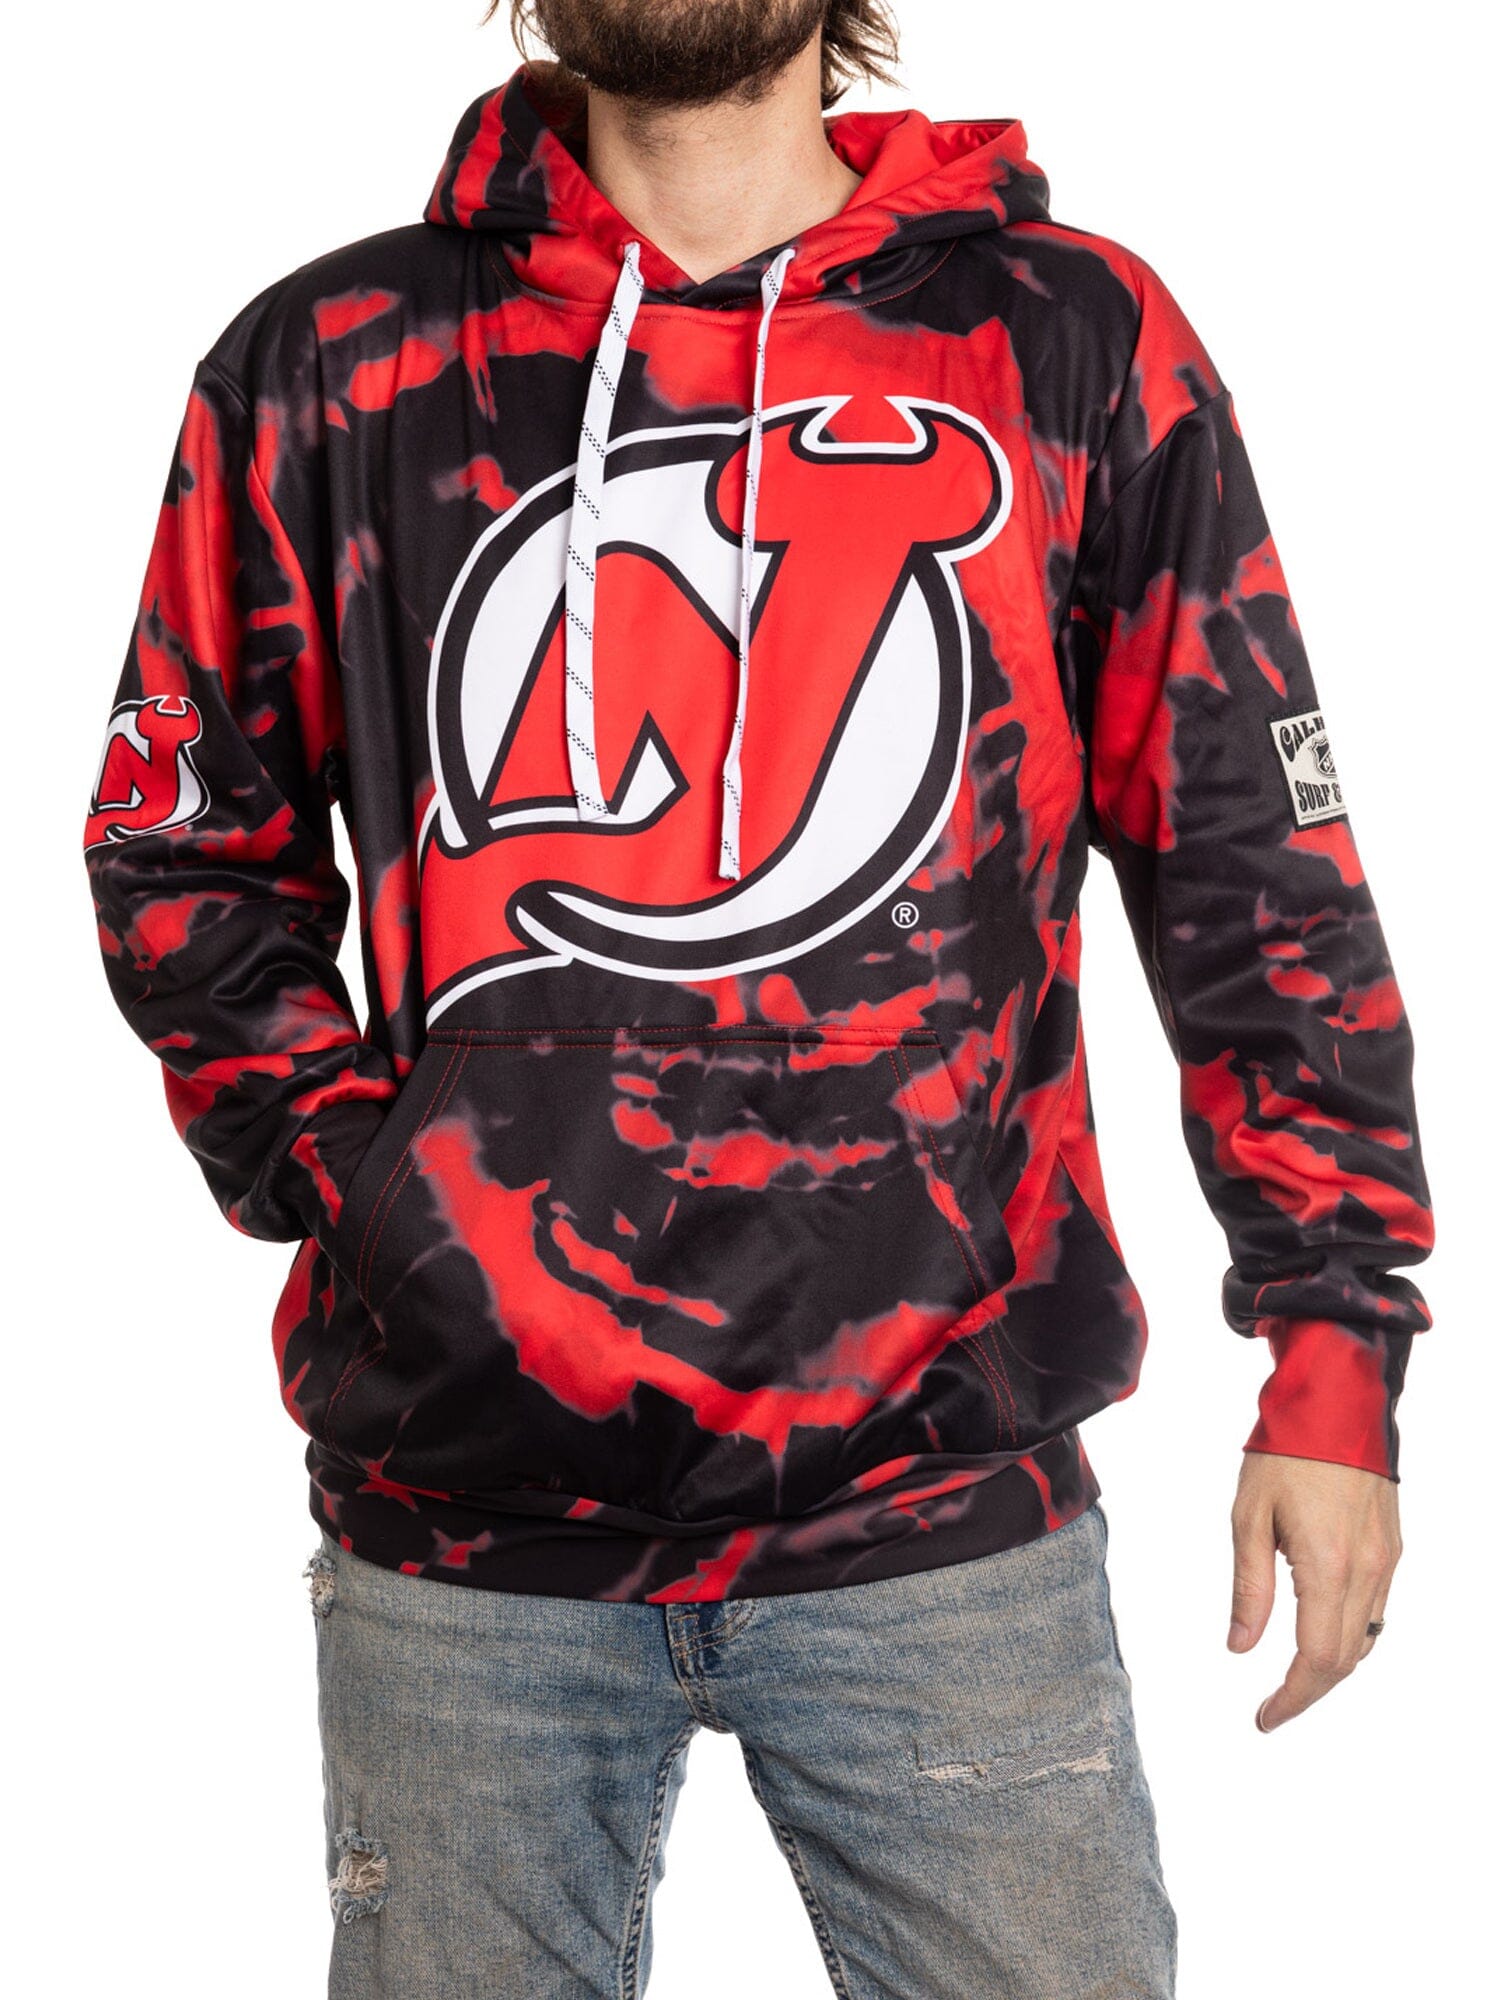 New Jersey Devils Hockey Hoodie - FRONT